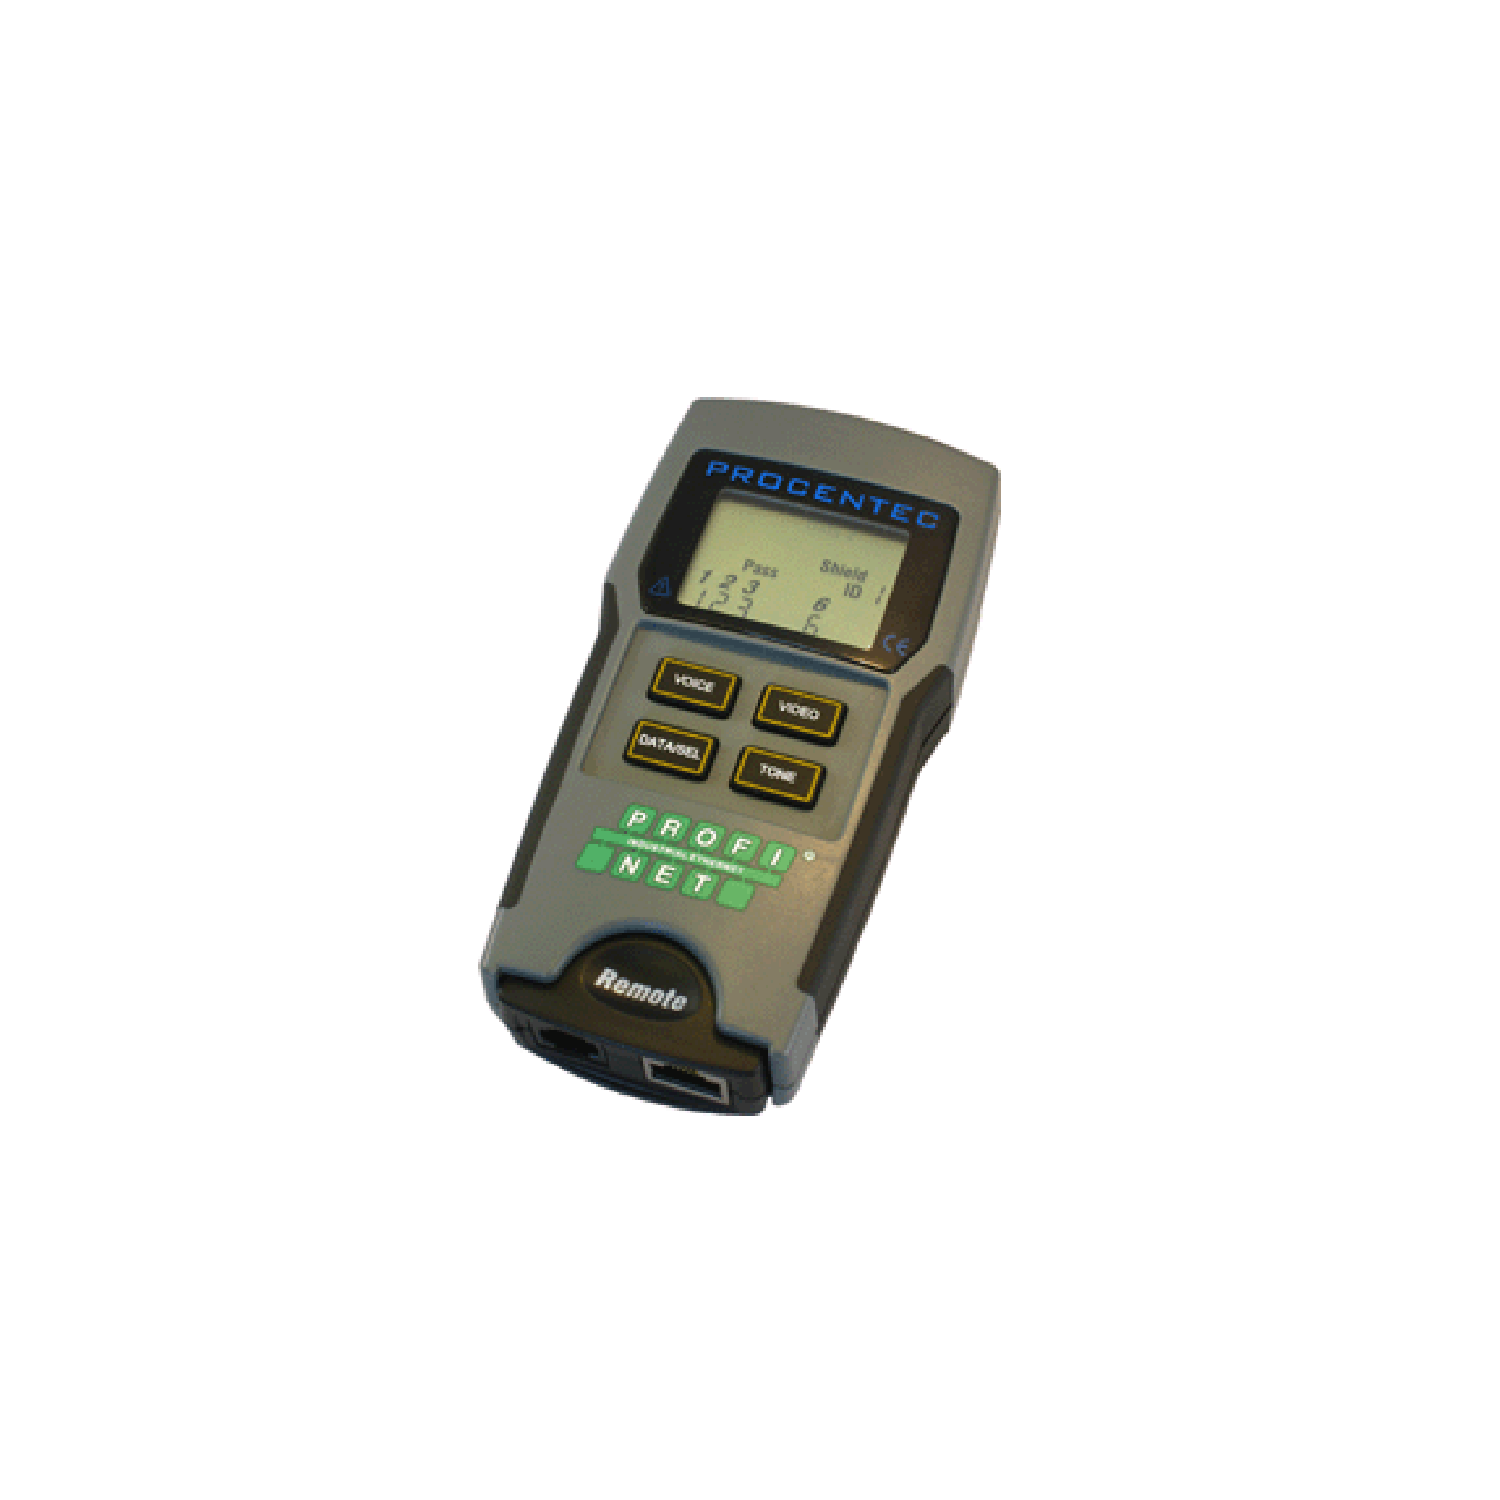 PROFINET PN-1 Cable Tester